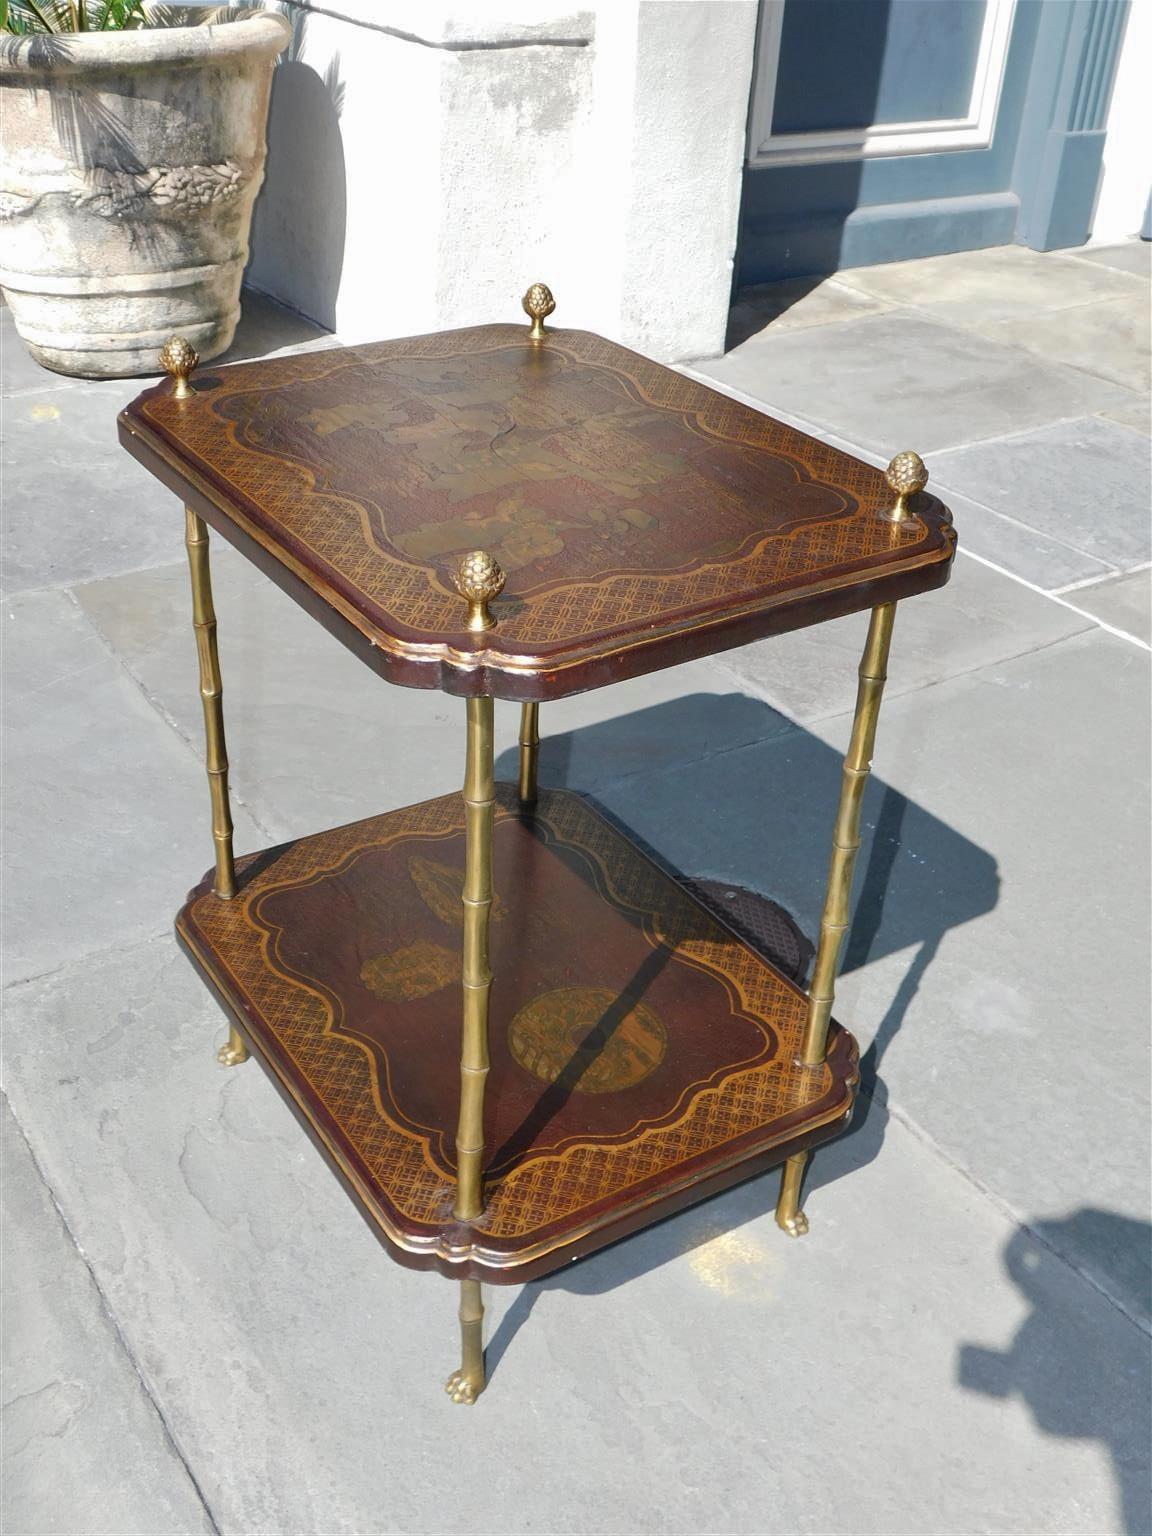 English Chinoiserie & Brass Finial Two Tiered Side Table with Claw Feet, C. 1850 For Sale 1